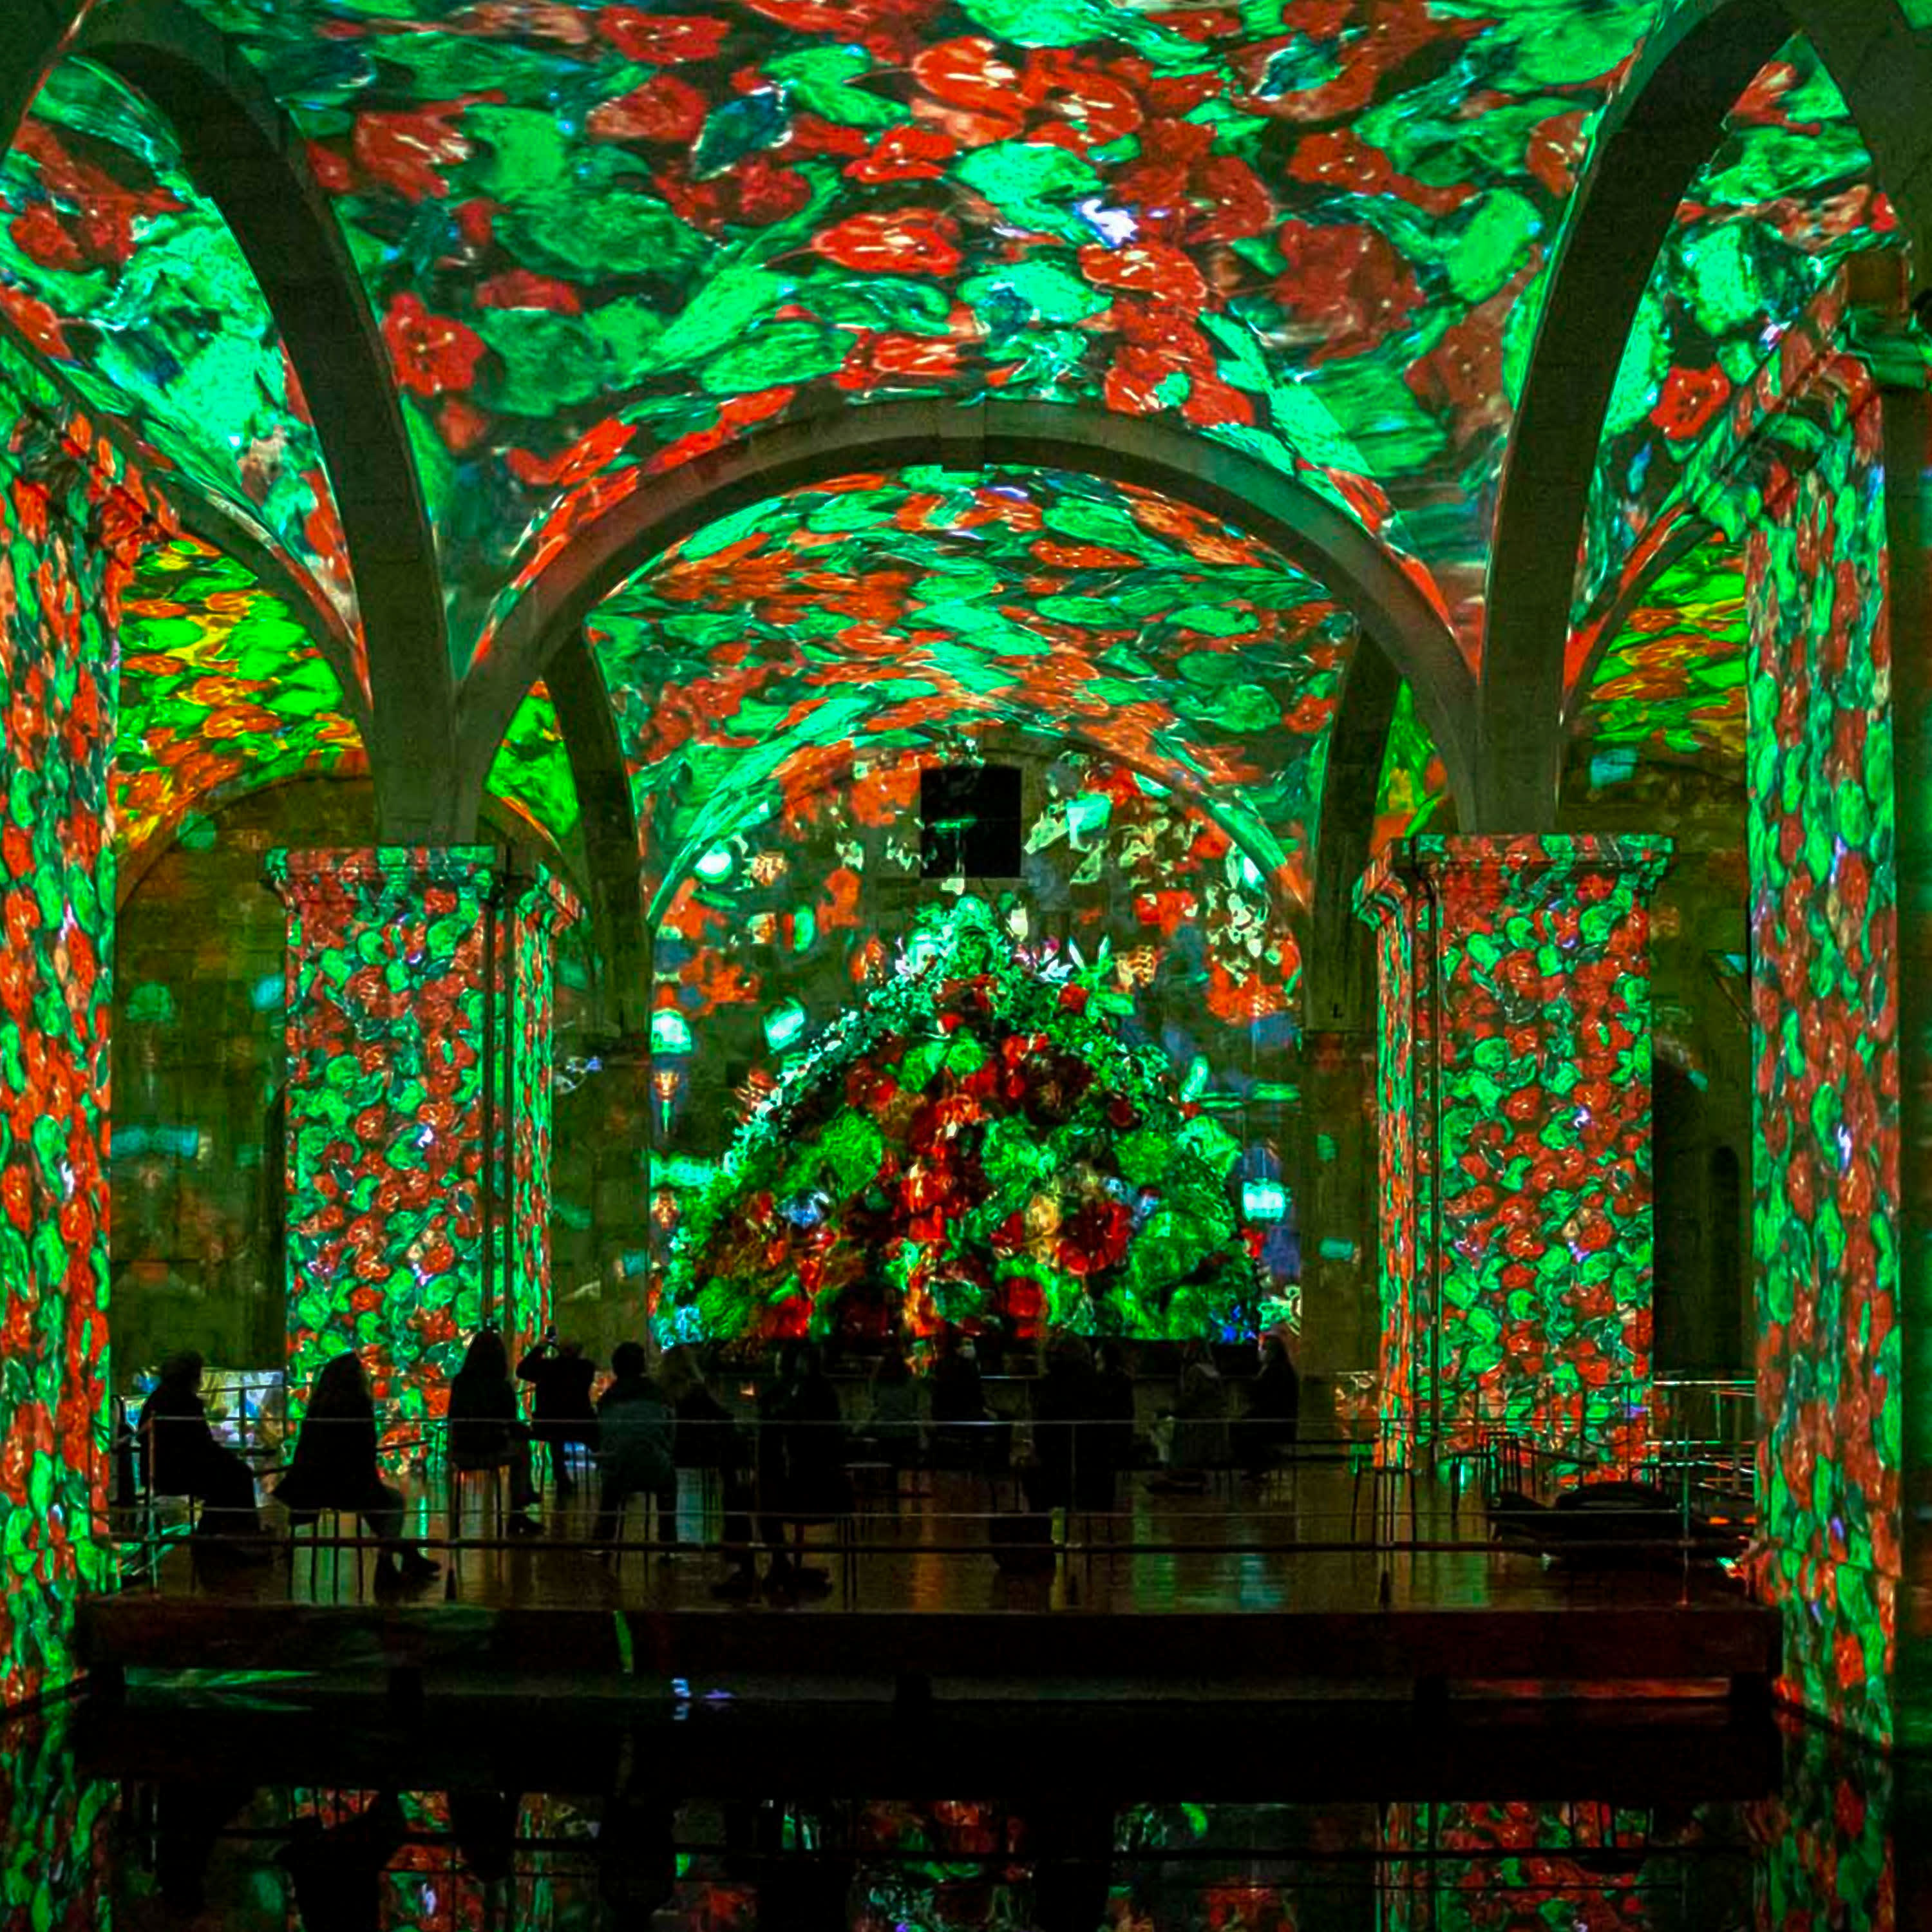 Immersive artistic experiences for the whole family with videomapping, light and color games, and interactive projections about art, history and more